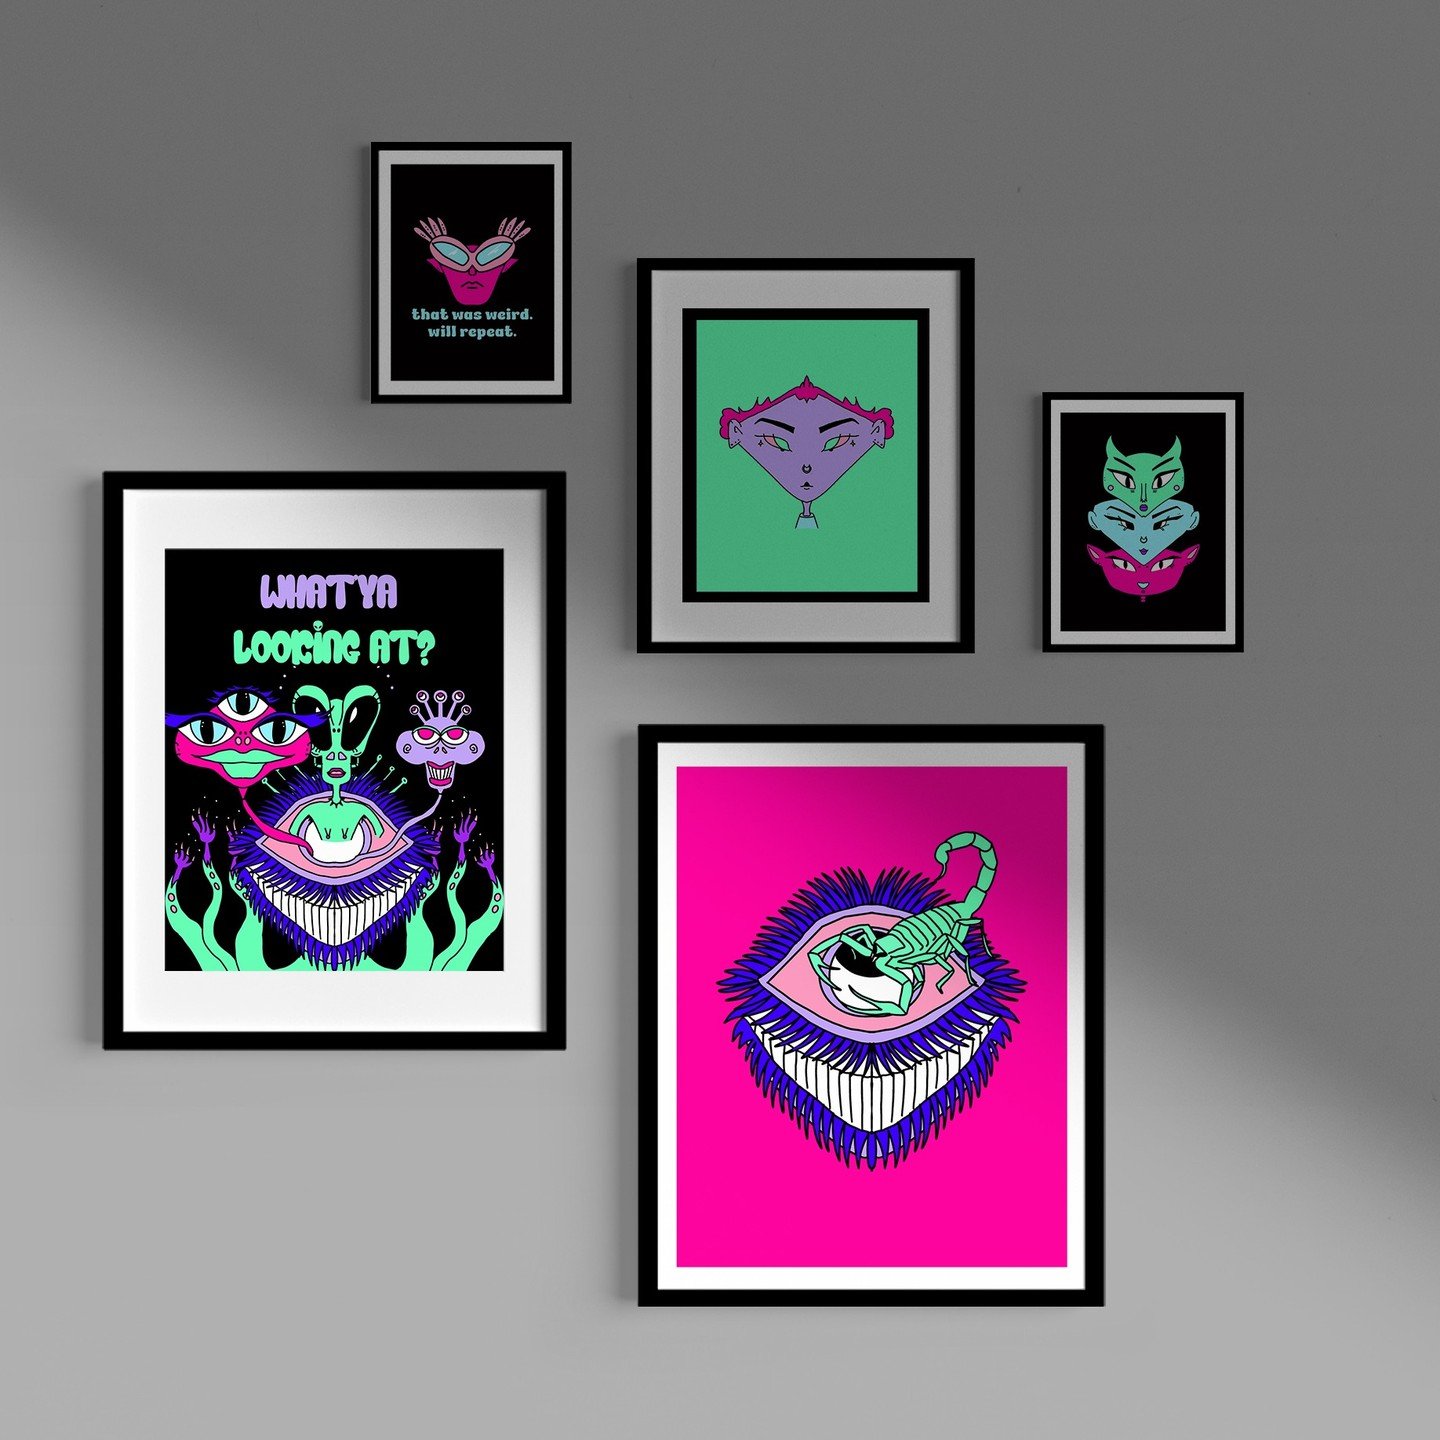 Collection of Illustrations #illustrations #posters #graphicdesigner #graphicdesign #alien #freelance #design #drawing #procreate